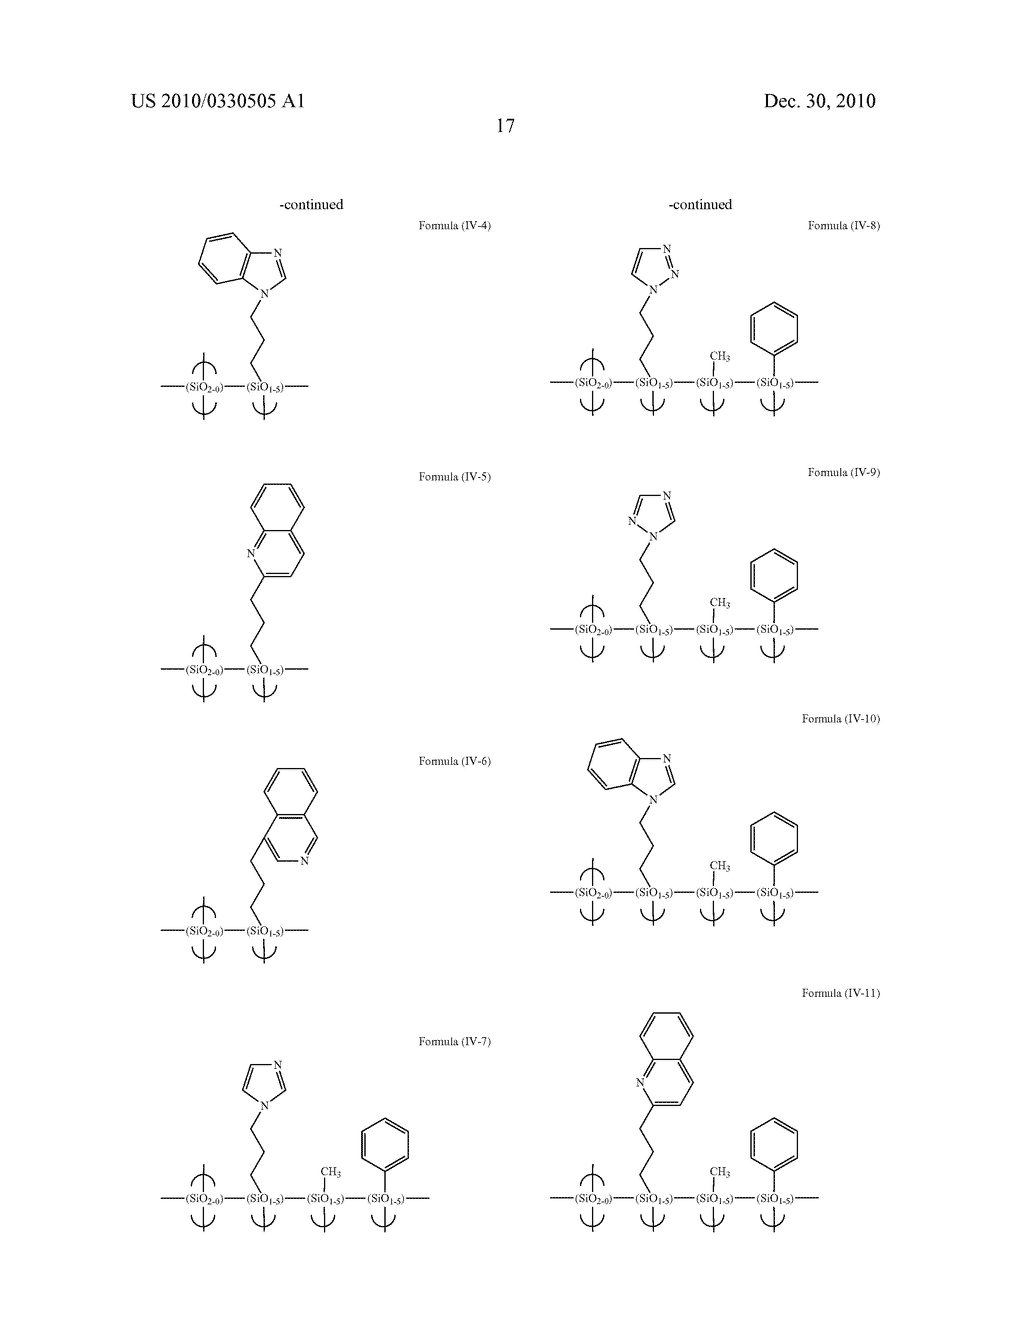 RESIST UNDERLAYER FILM FORMING COMPOSITION CONTAINING SILICONE HAVING CYCLIC AMINO GROUP - diagram, schematic, and image 20